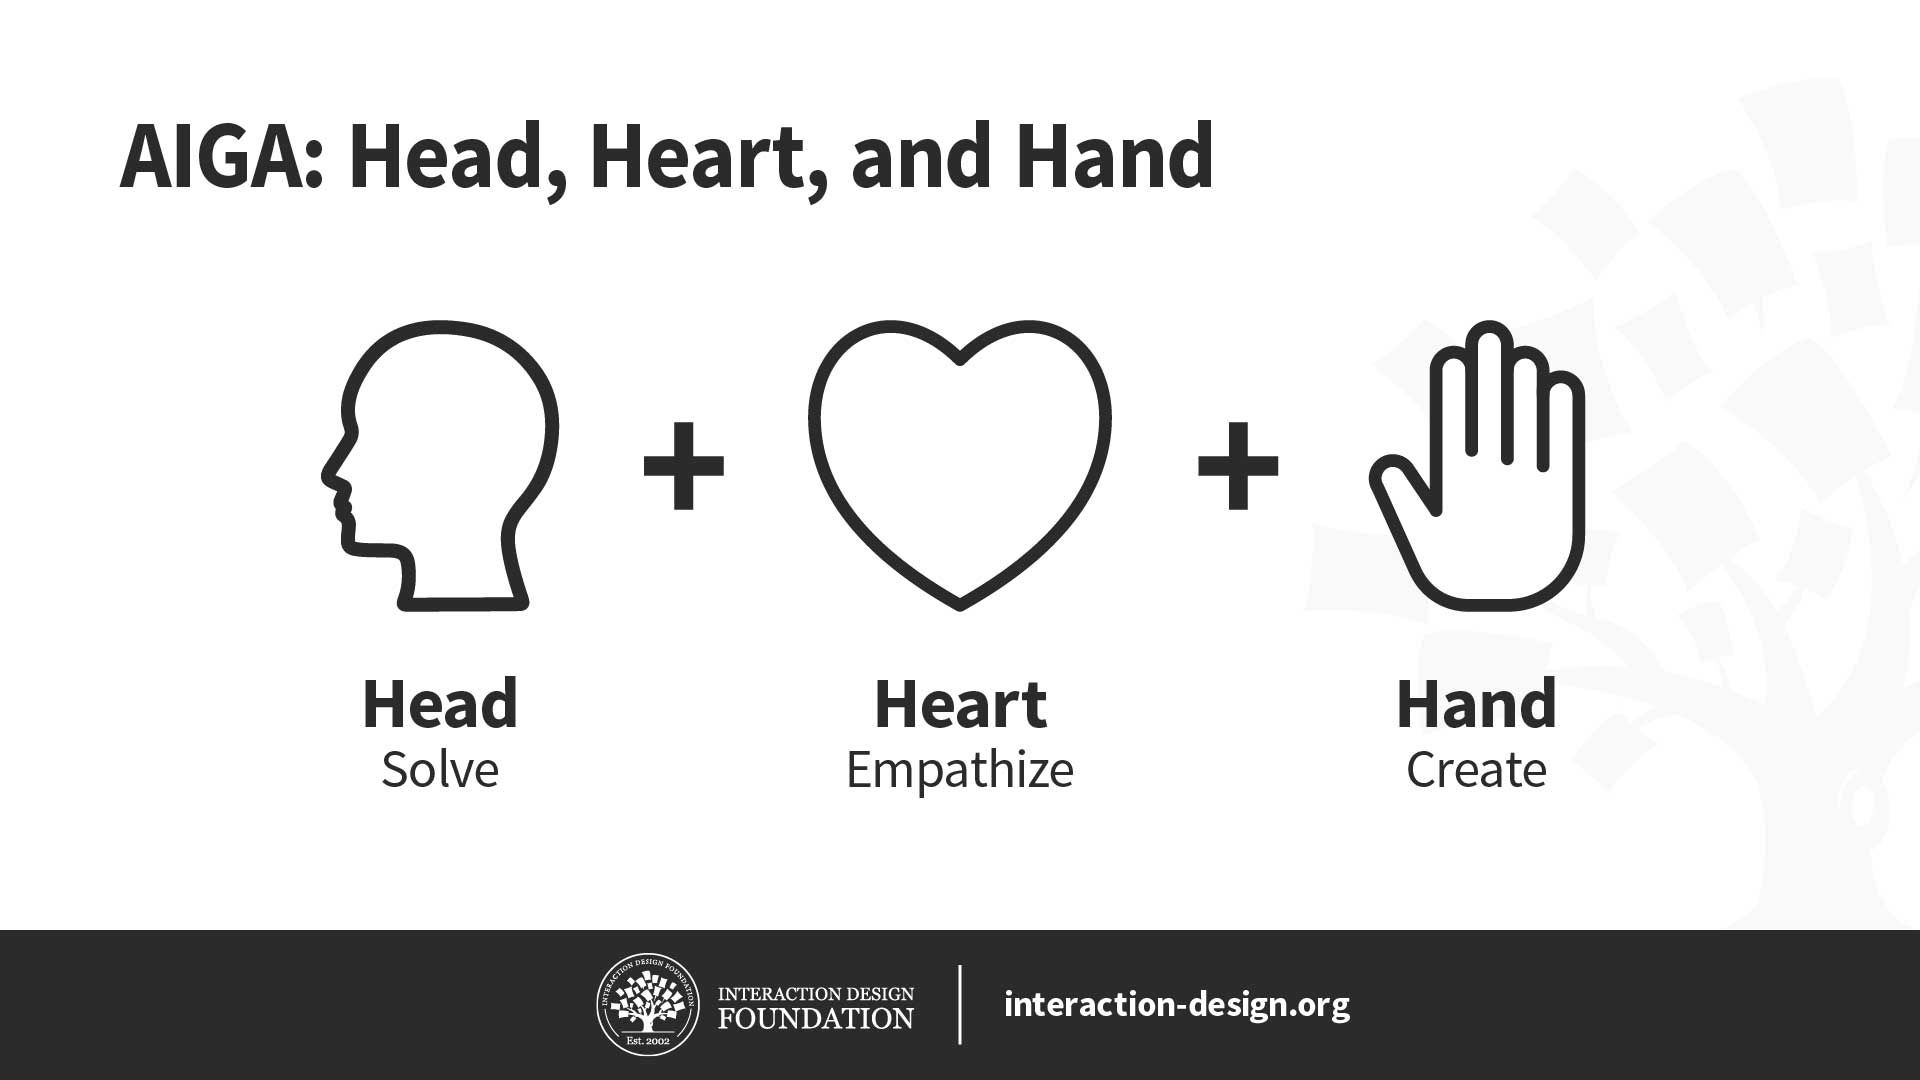 Illustration of AIGA's design process called Head, Heart, and Hand. Profile of a person for Solve, a heart for Empathize, and a hand upraised for Create.